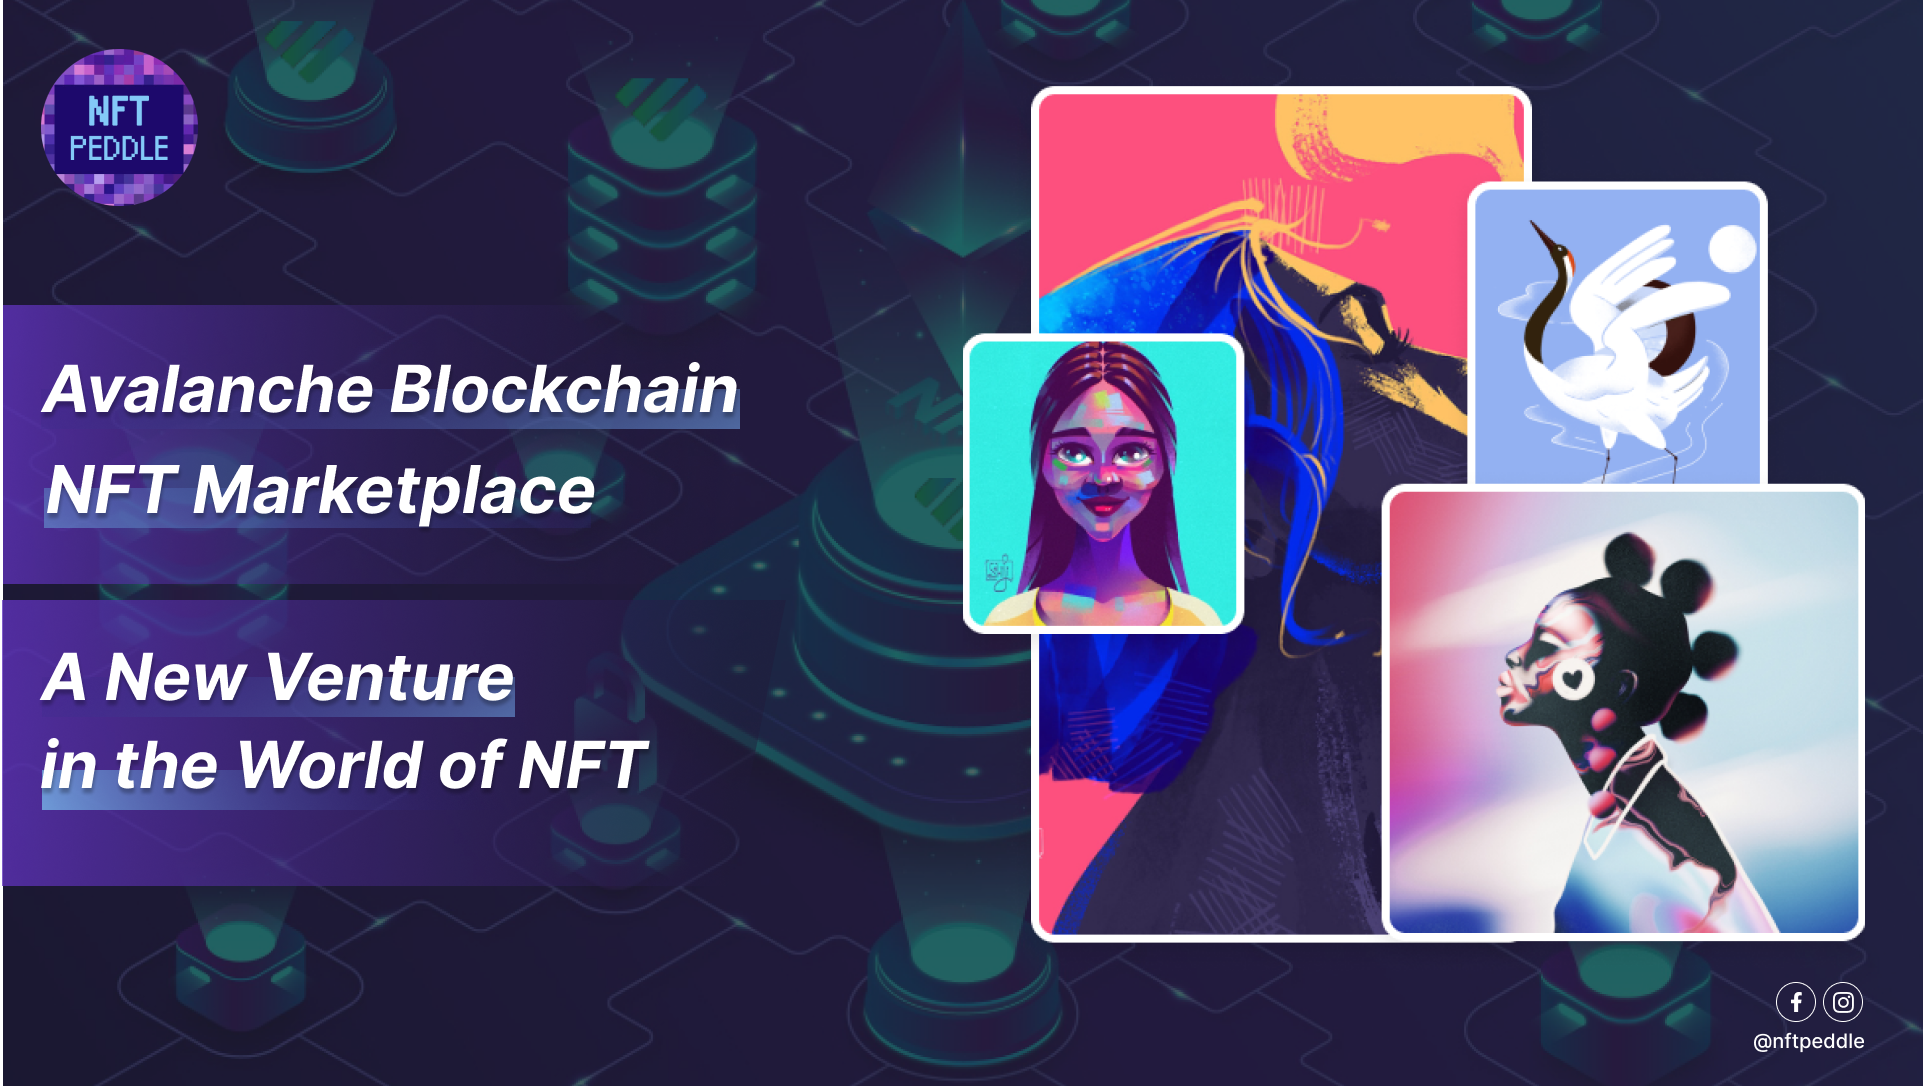 Avalanche Blockchain NFT Marketplace – A New Venture in the World of NFT